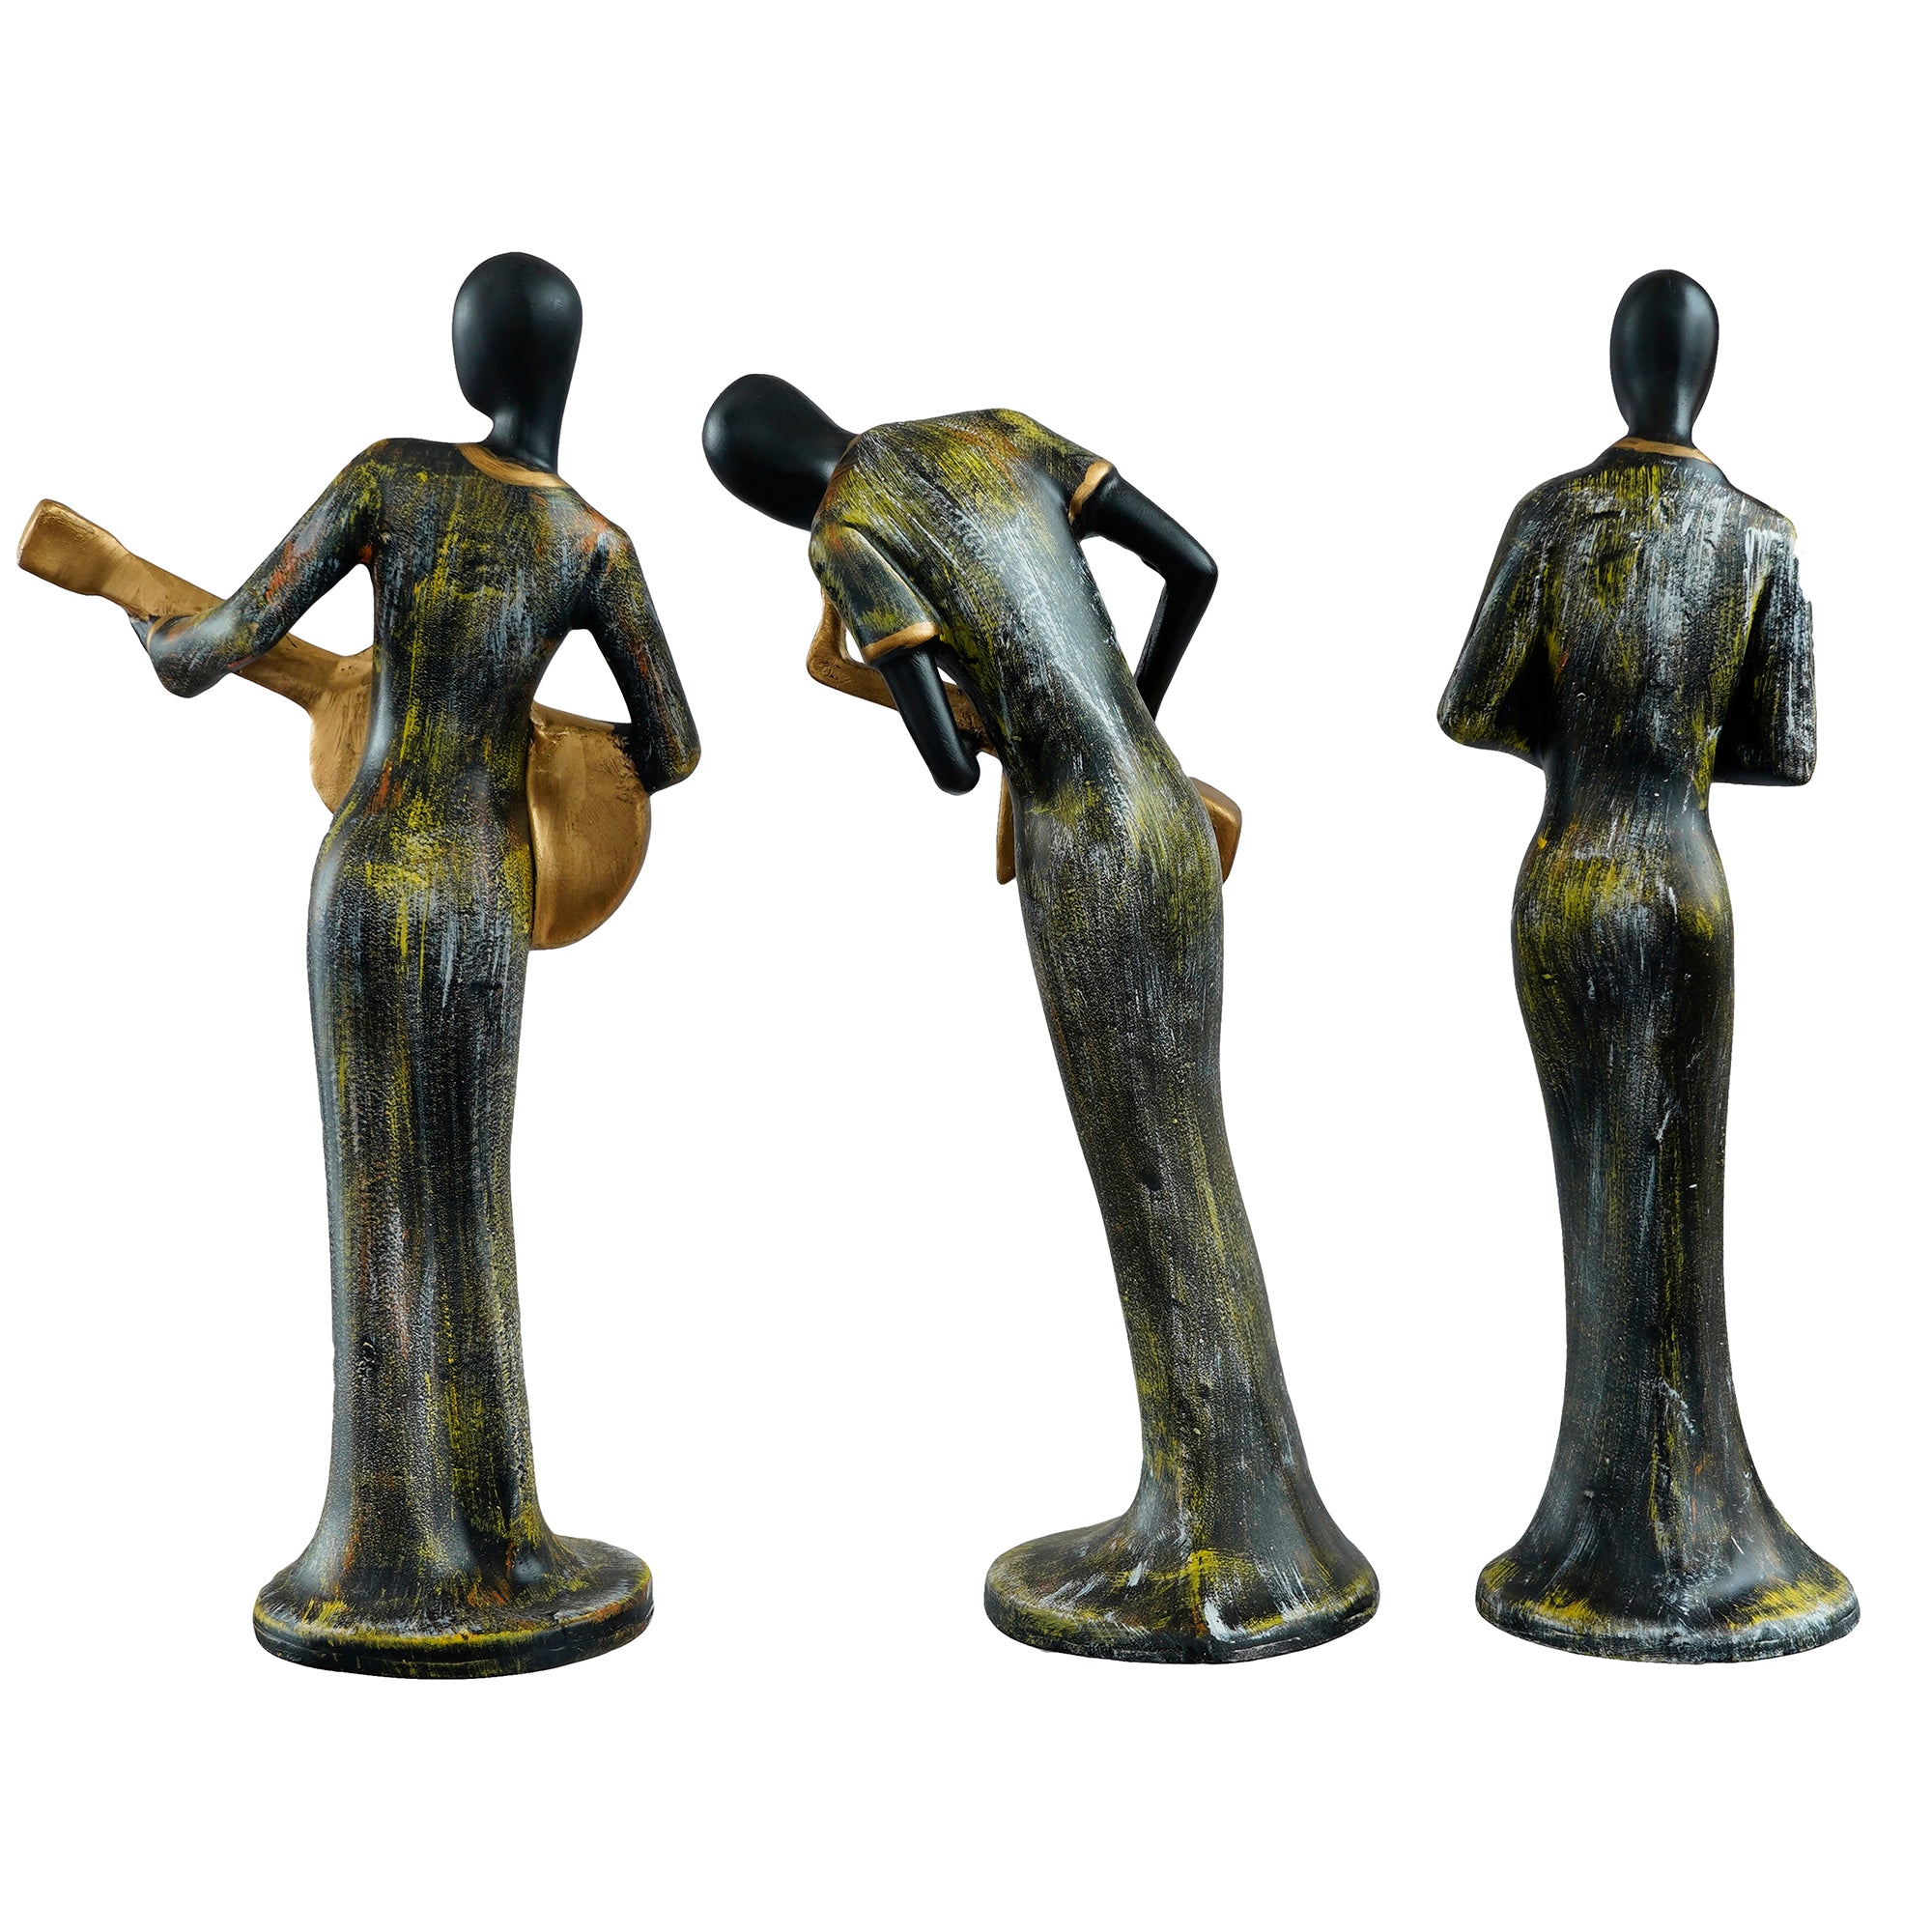 Grey and Black Polyresin Set of 3 Ladies figurines Playing Wind, Guitar,Saxophone Musical Instrument Handcrafted Decorative Showpiece 6